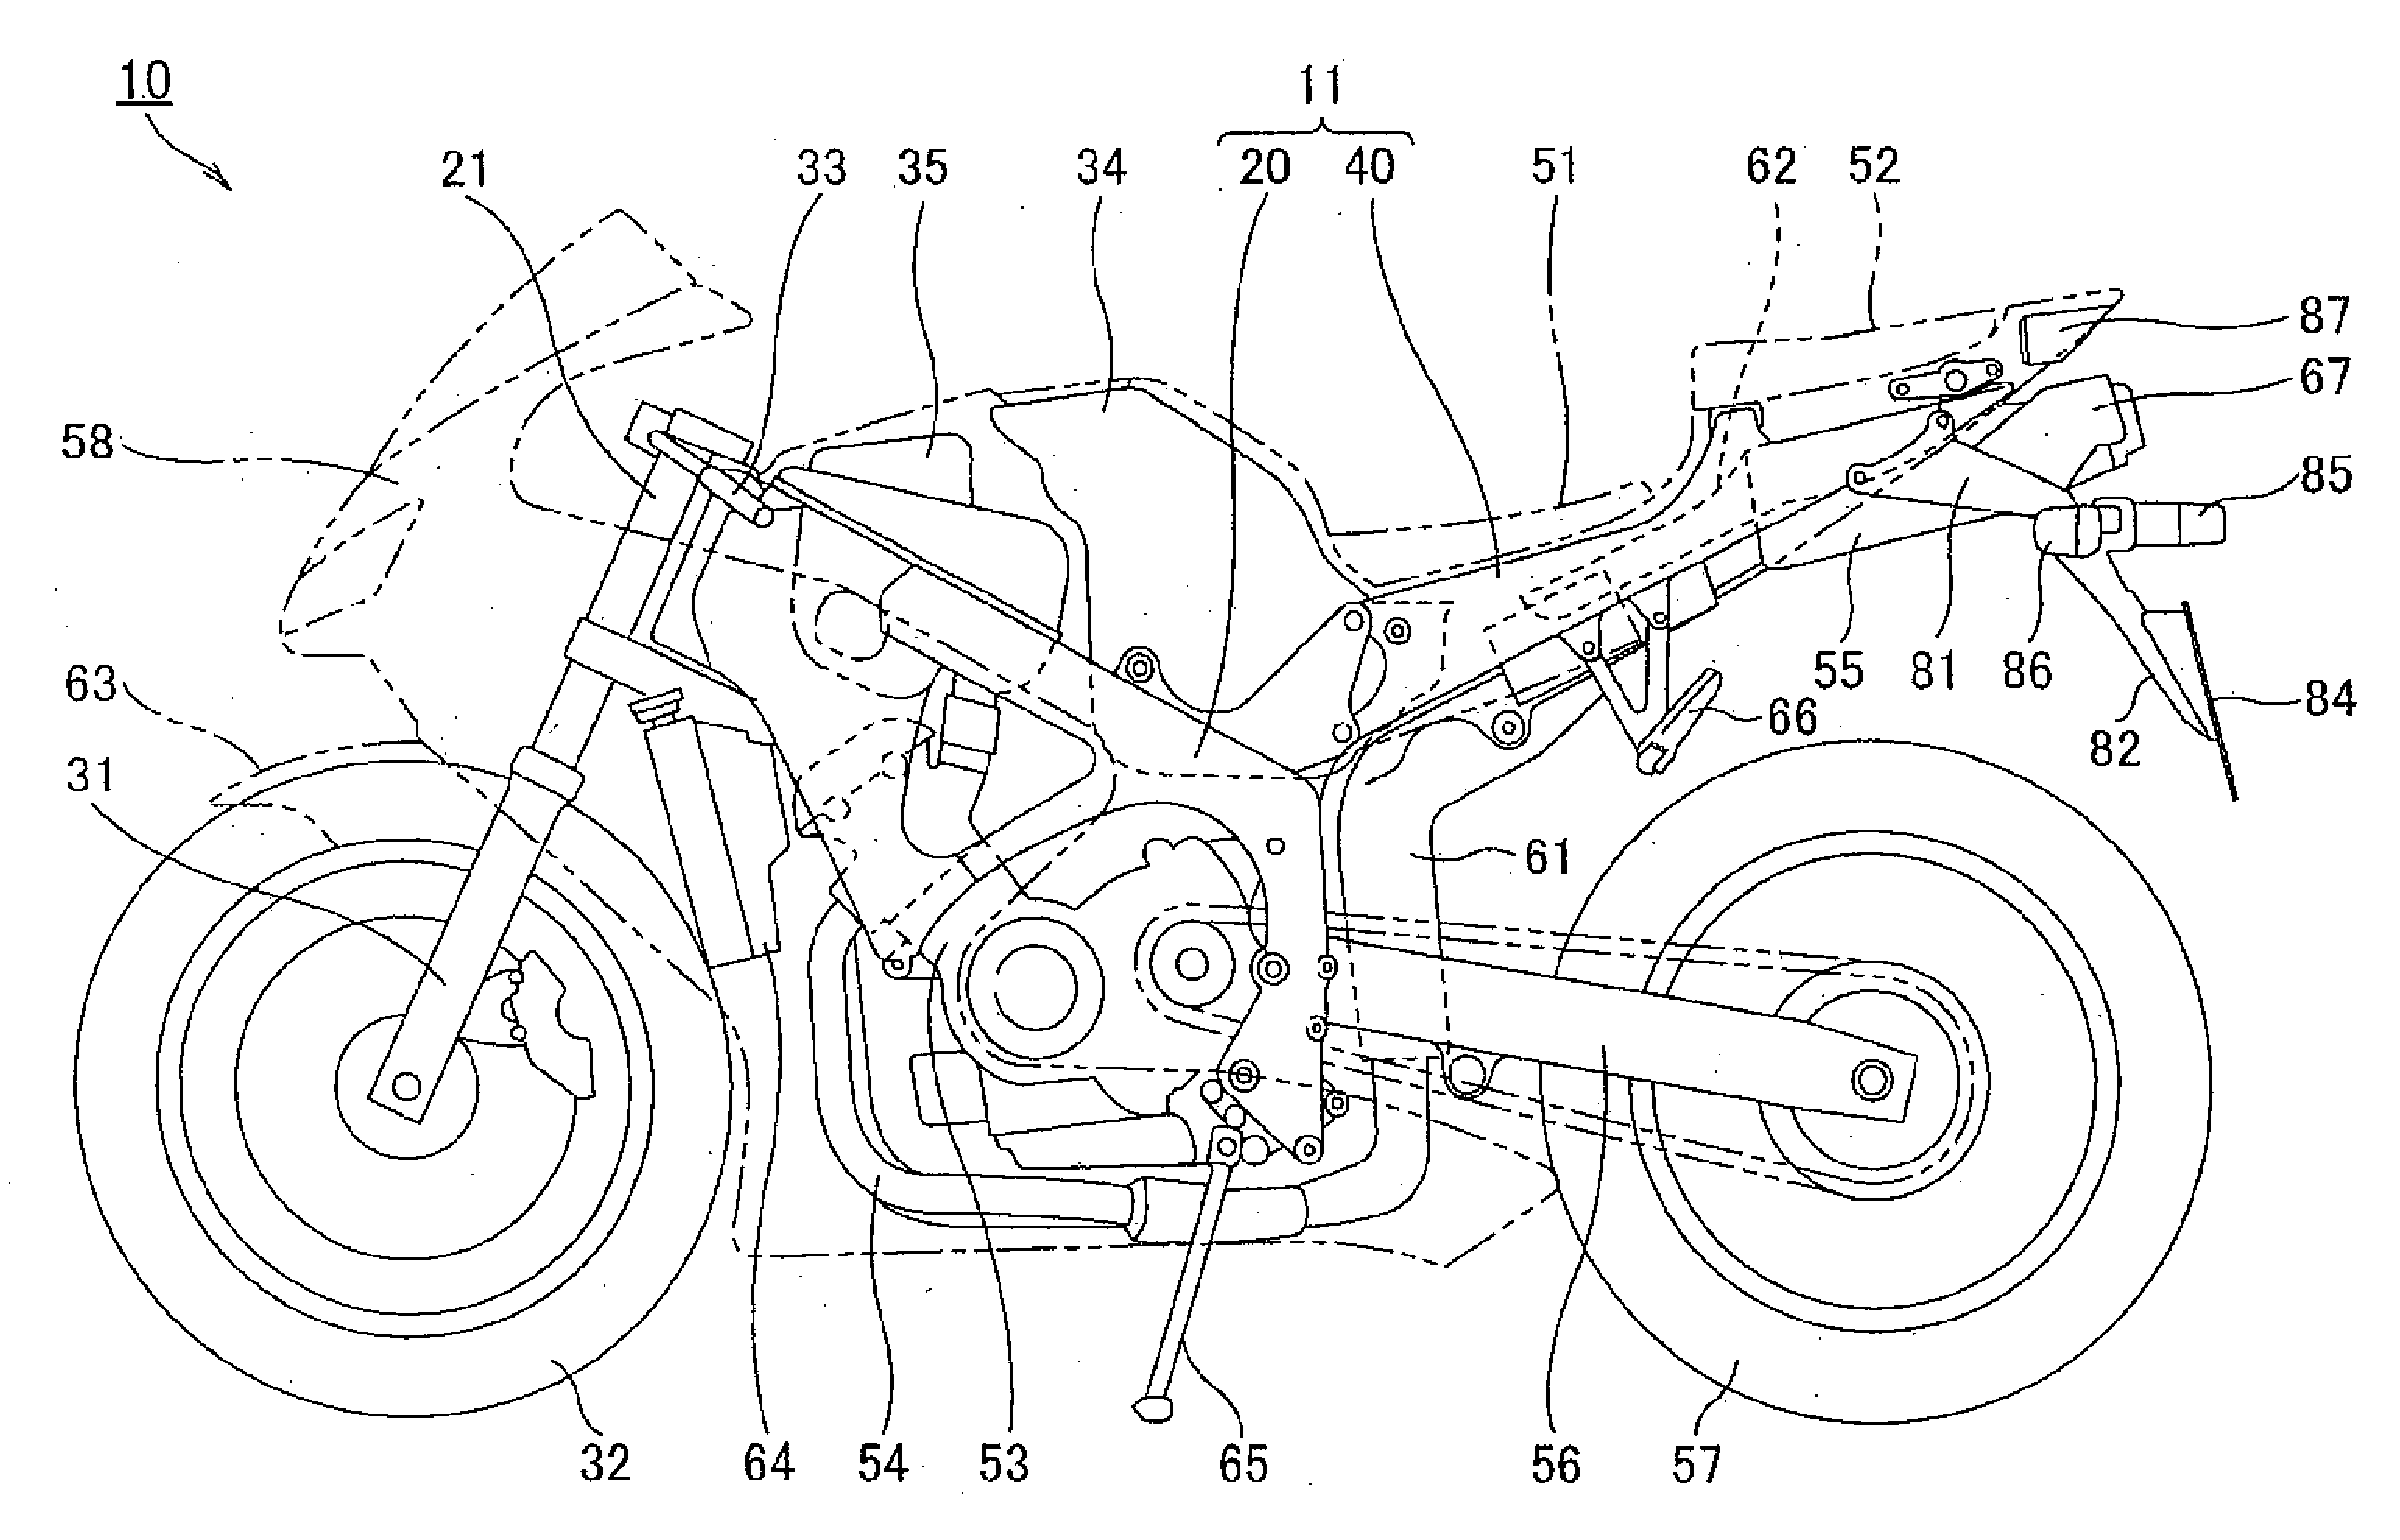 Seat rail structure of motorcycle